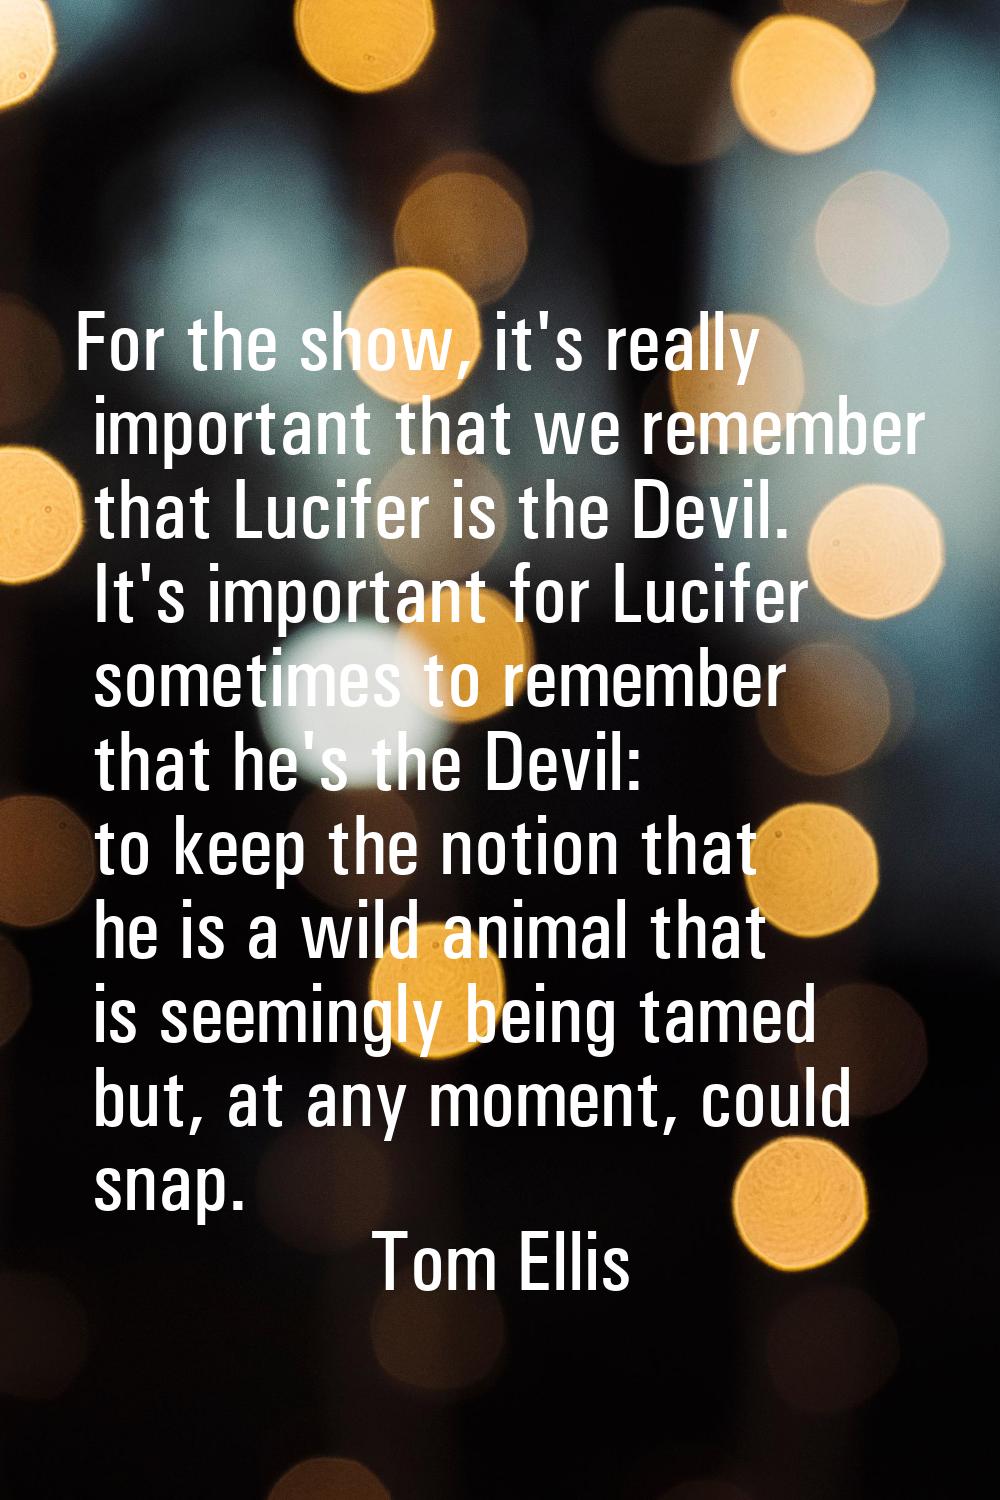 For the show, it's really important that we remember that Lucifer is the Devil. It's important for 